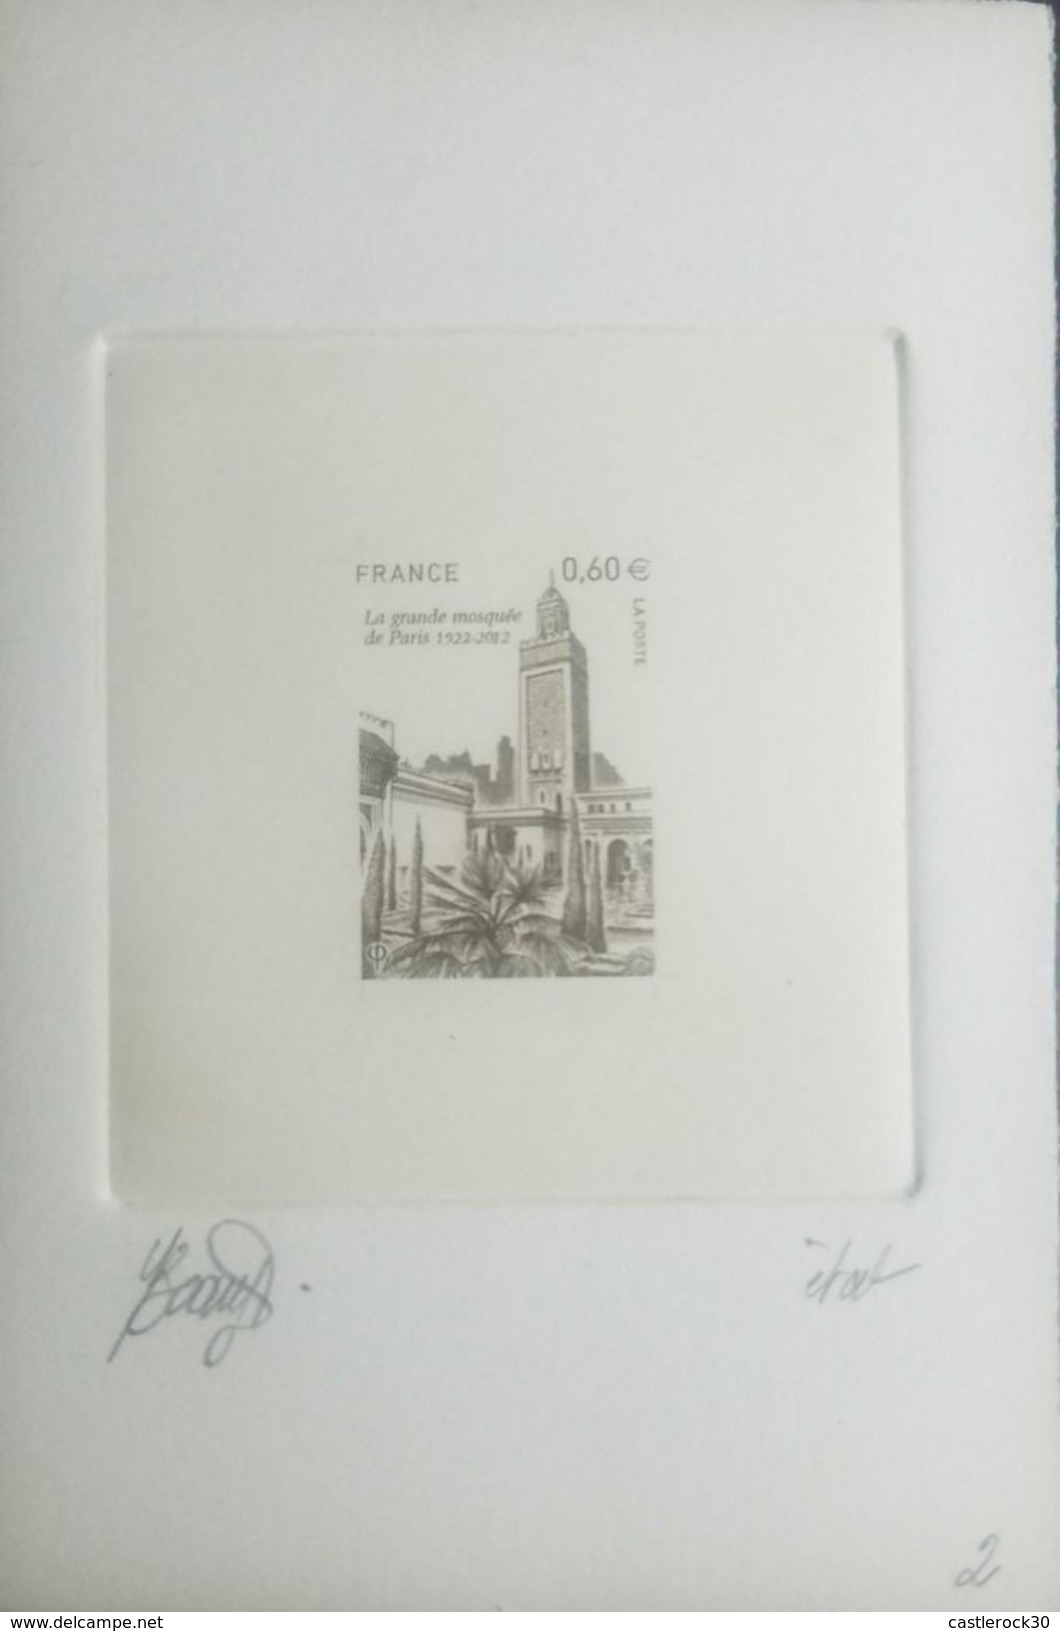 O) 2012 FRANCE, STAGE PROOF - 2ND STAGE - PREUVE DETAT, GRAND MOSQUE OF PARIS- ARCHITECTURE OF 1922, XF - Unclassified